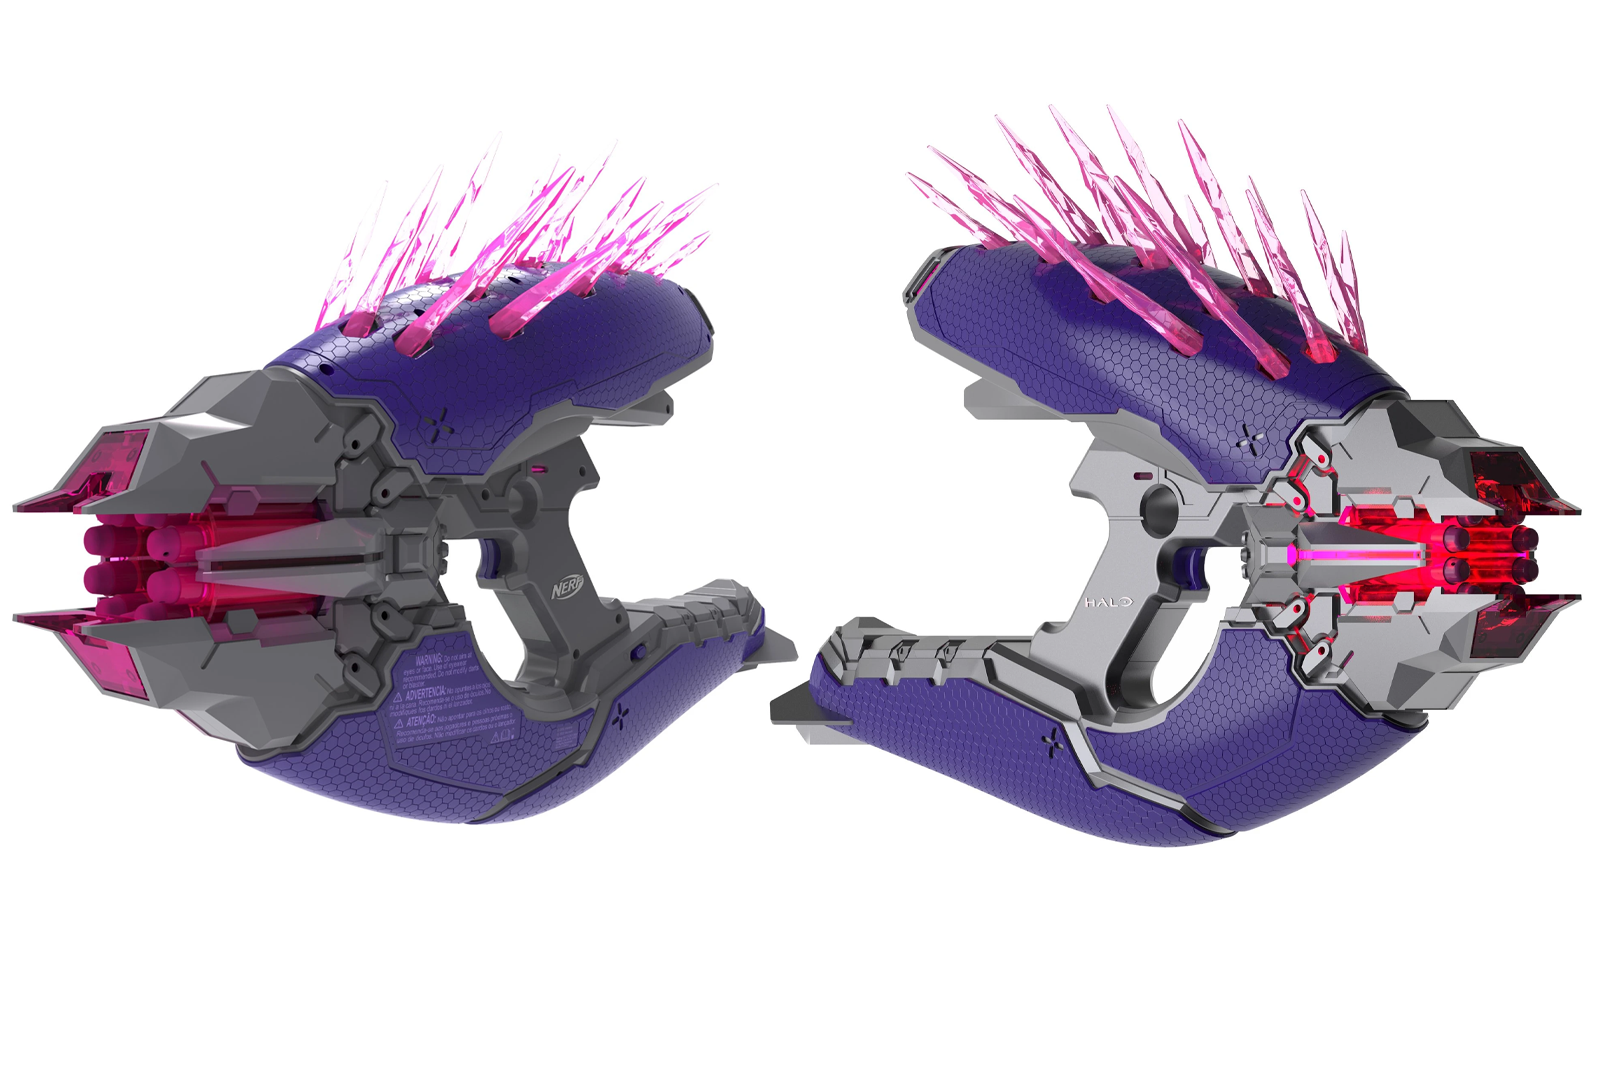 Nerf unveils the Needler from Halo - its newest limited blaster photo 1